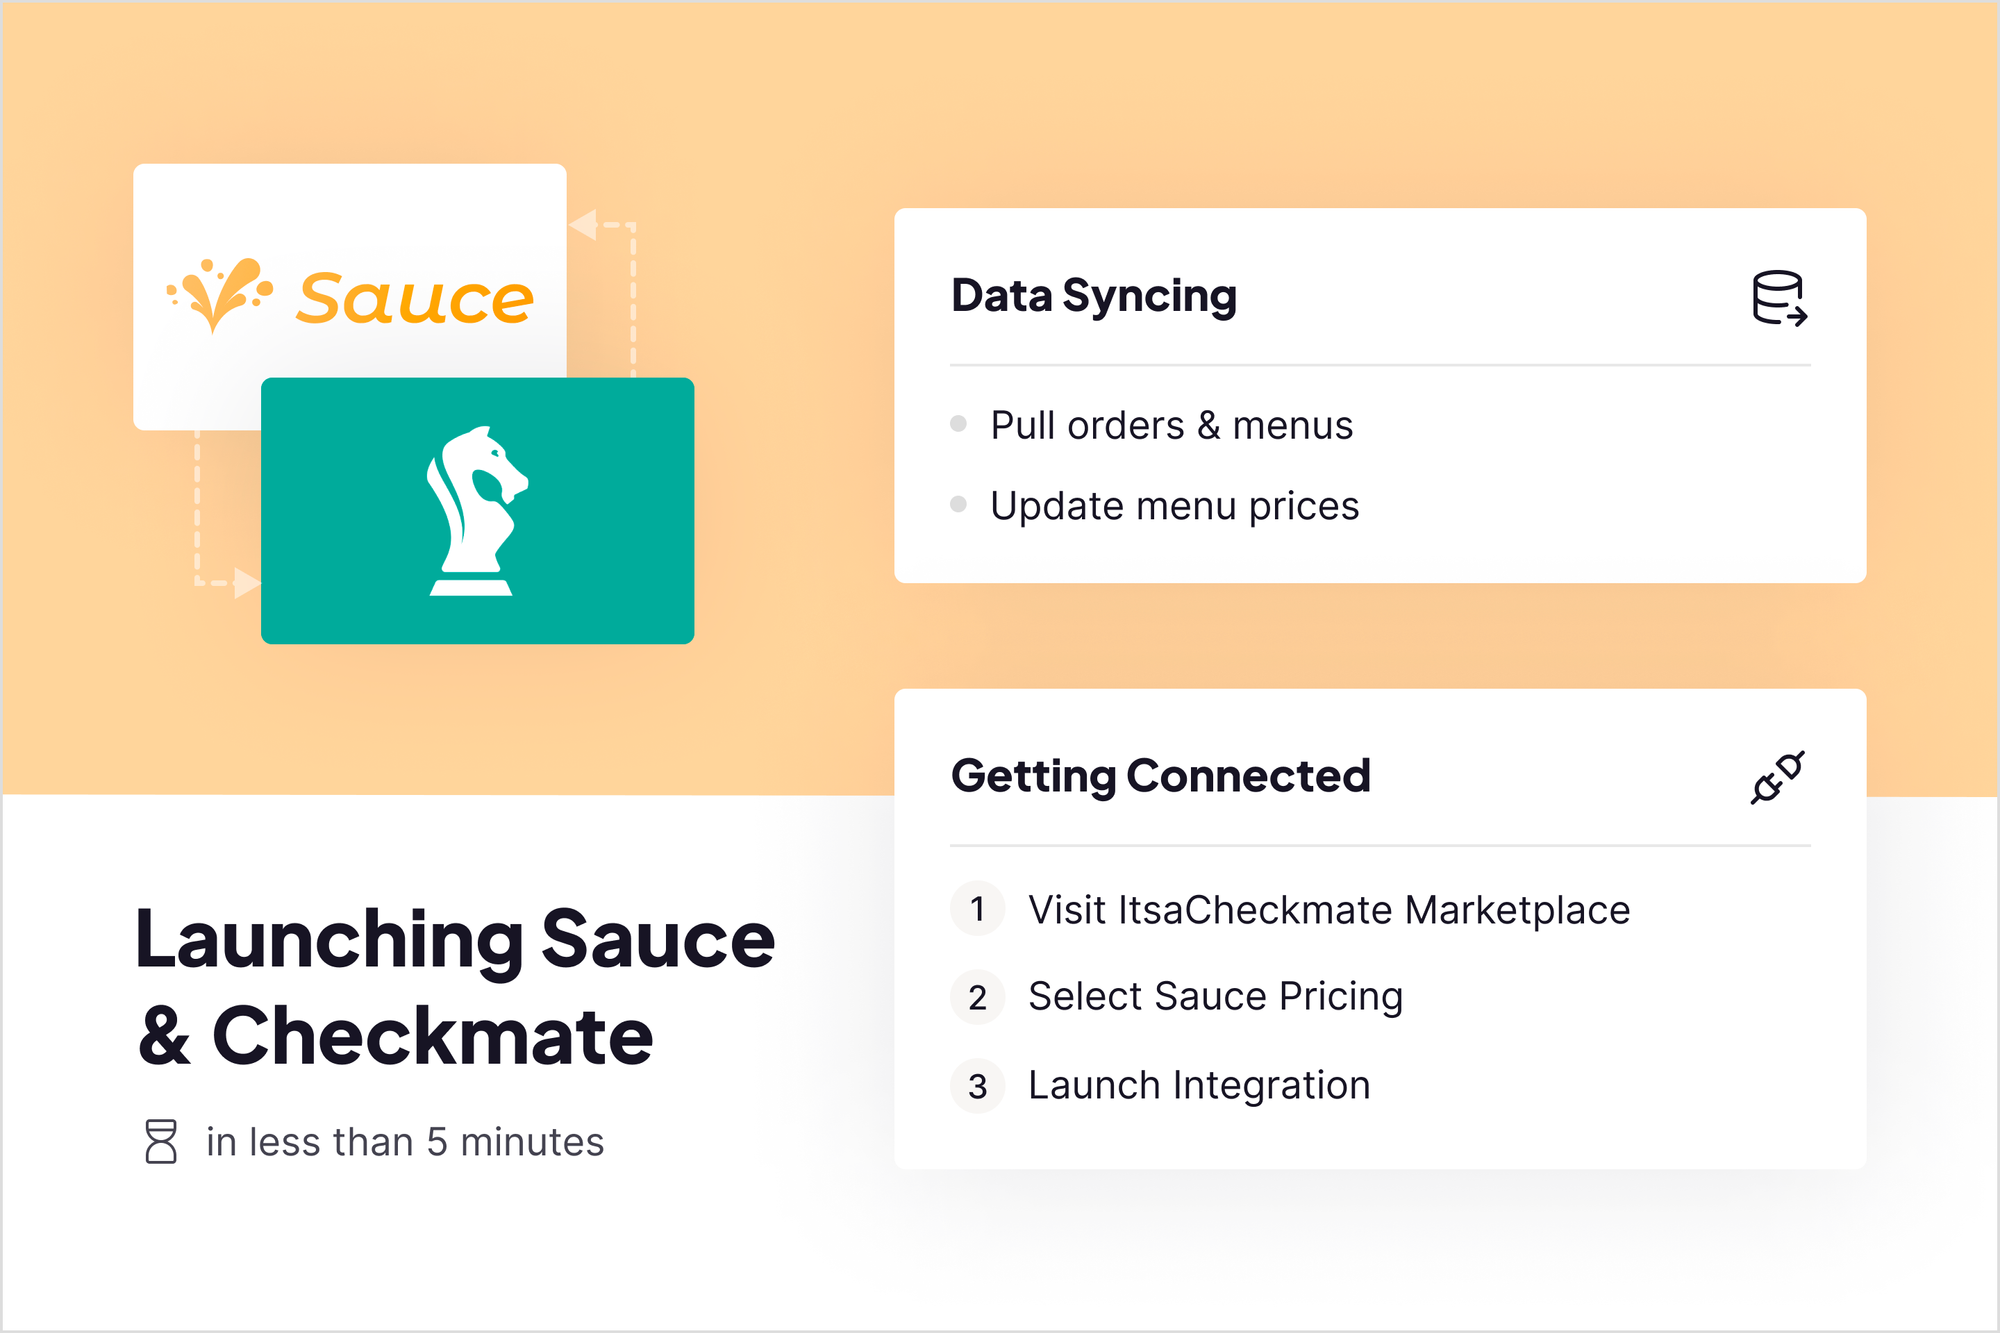 Announcing Sauce’s Partnership with ItsaCheckmate